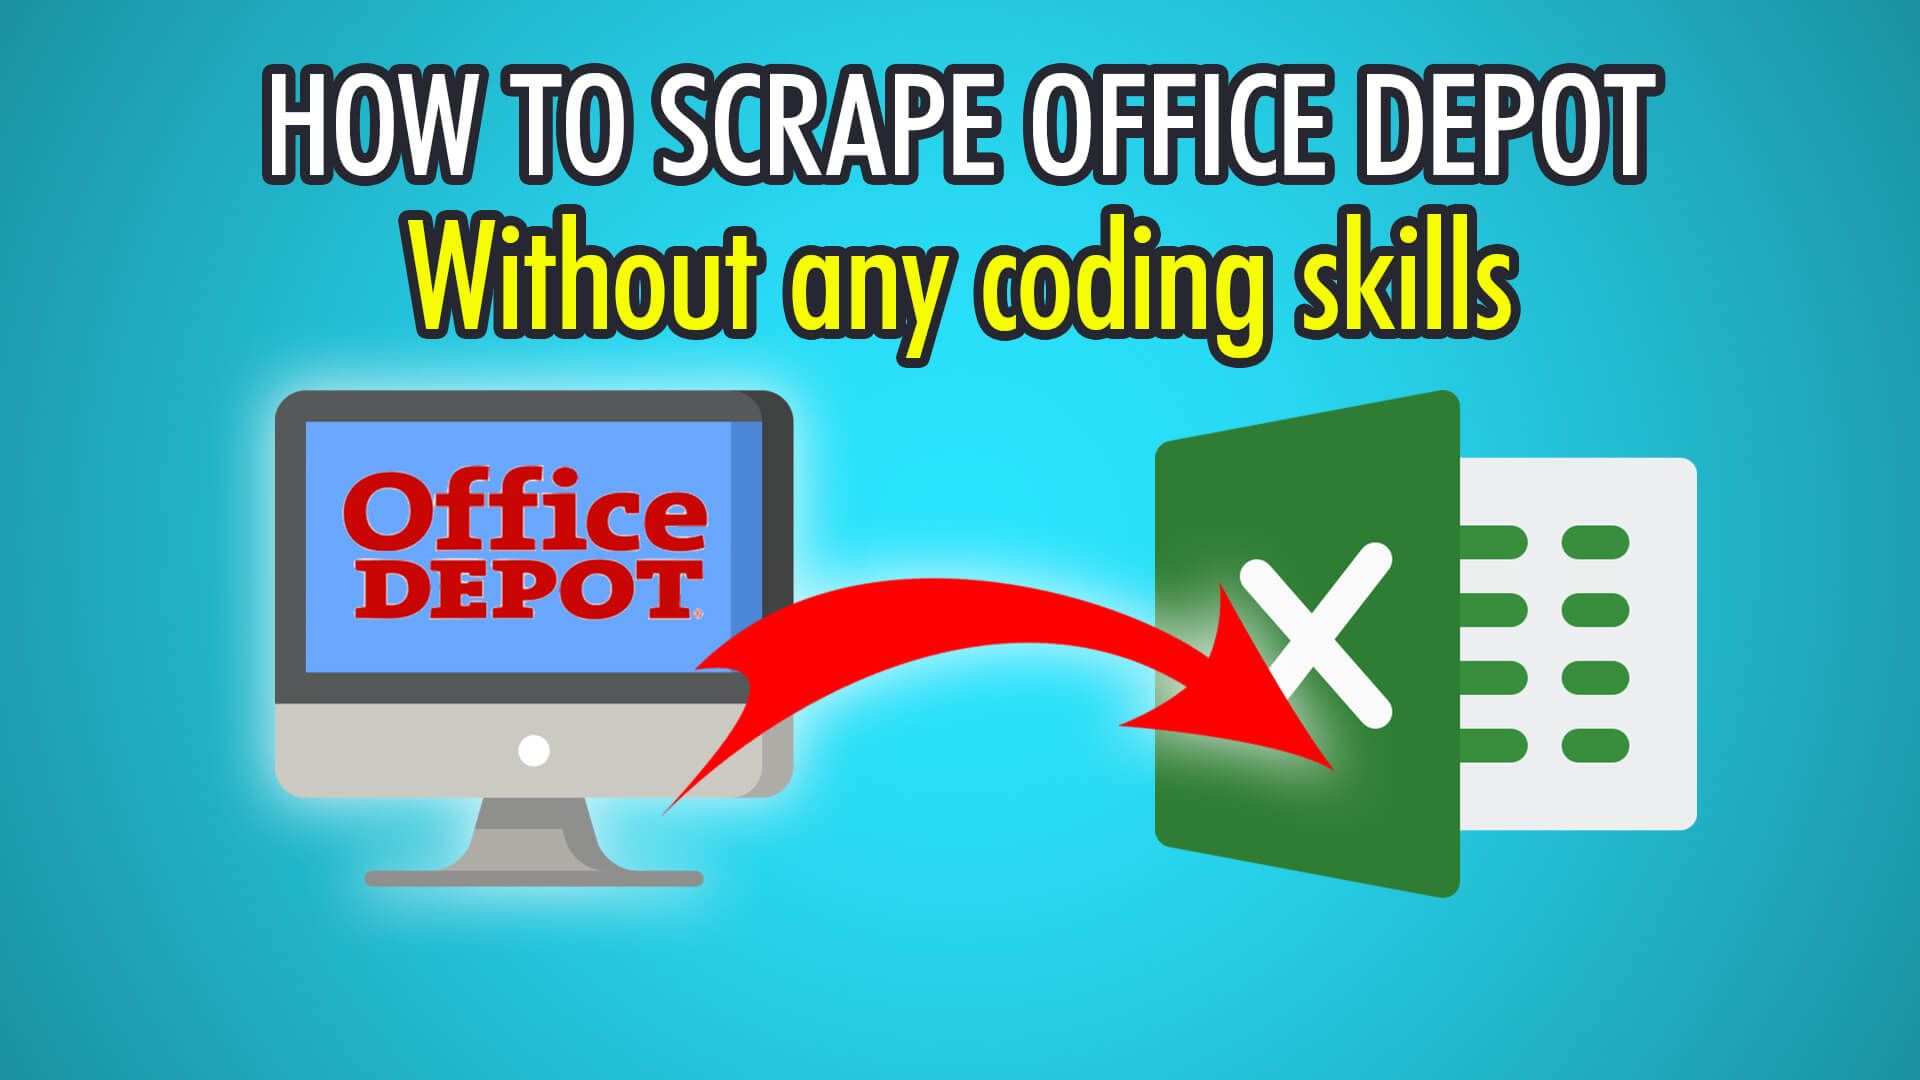 How to Scrape Office Depot